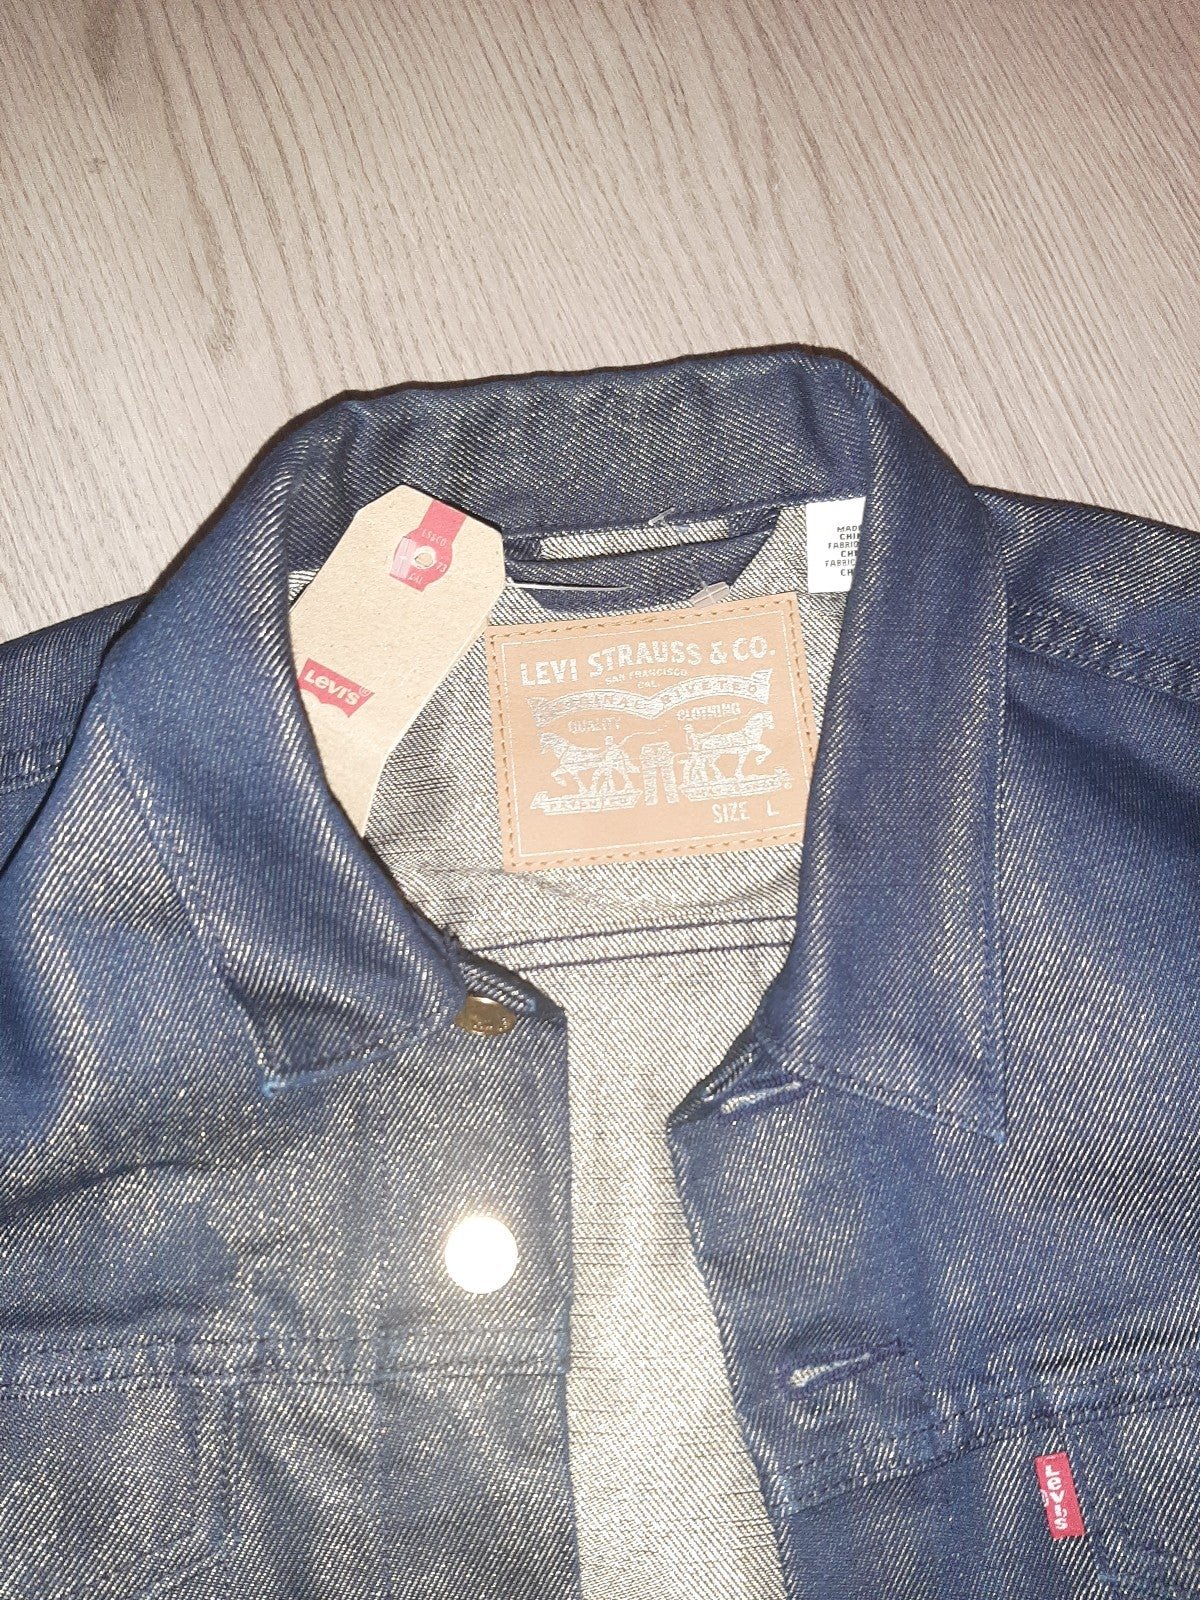 Nice NWT Levi Strauss & Co Large Denim Jean Jacket Unisex Shiny Material Vintage iN3BgYnWT Factory Price